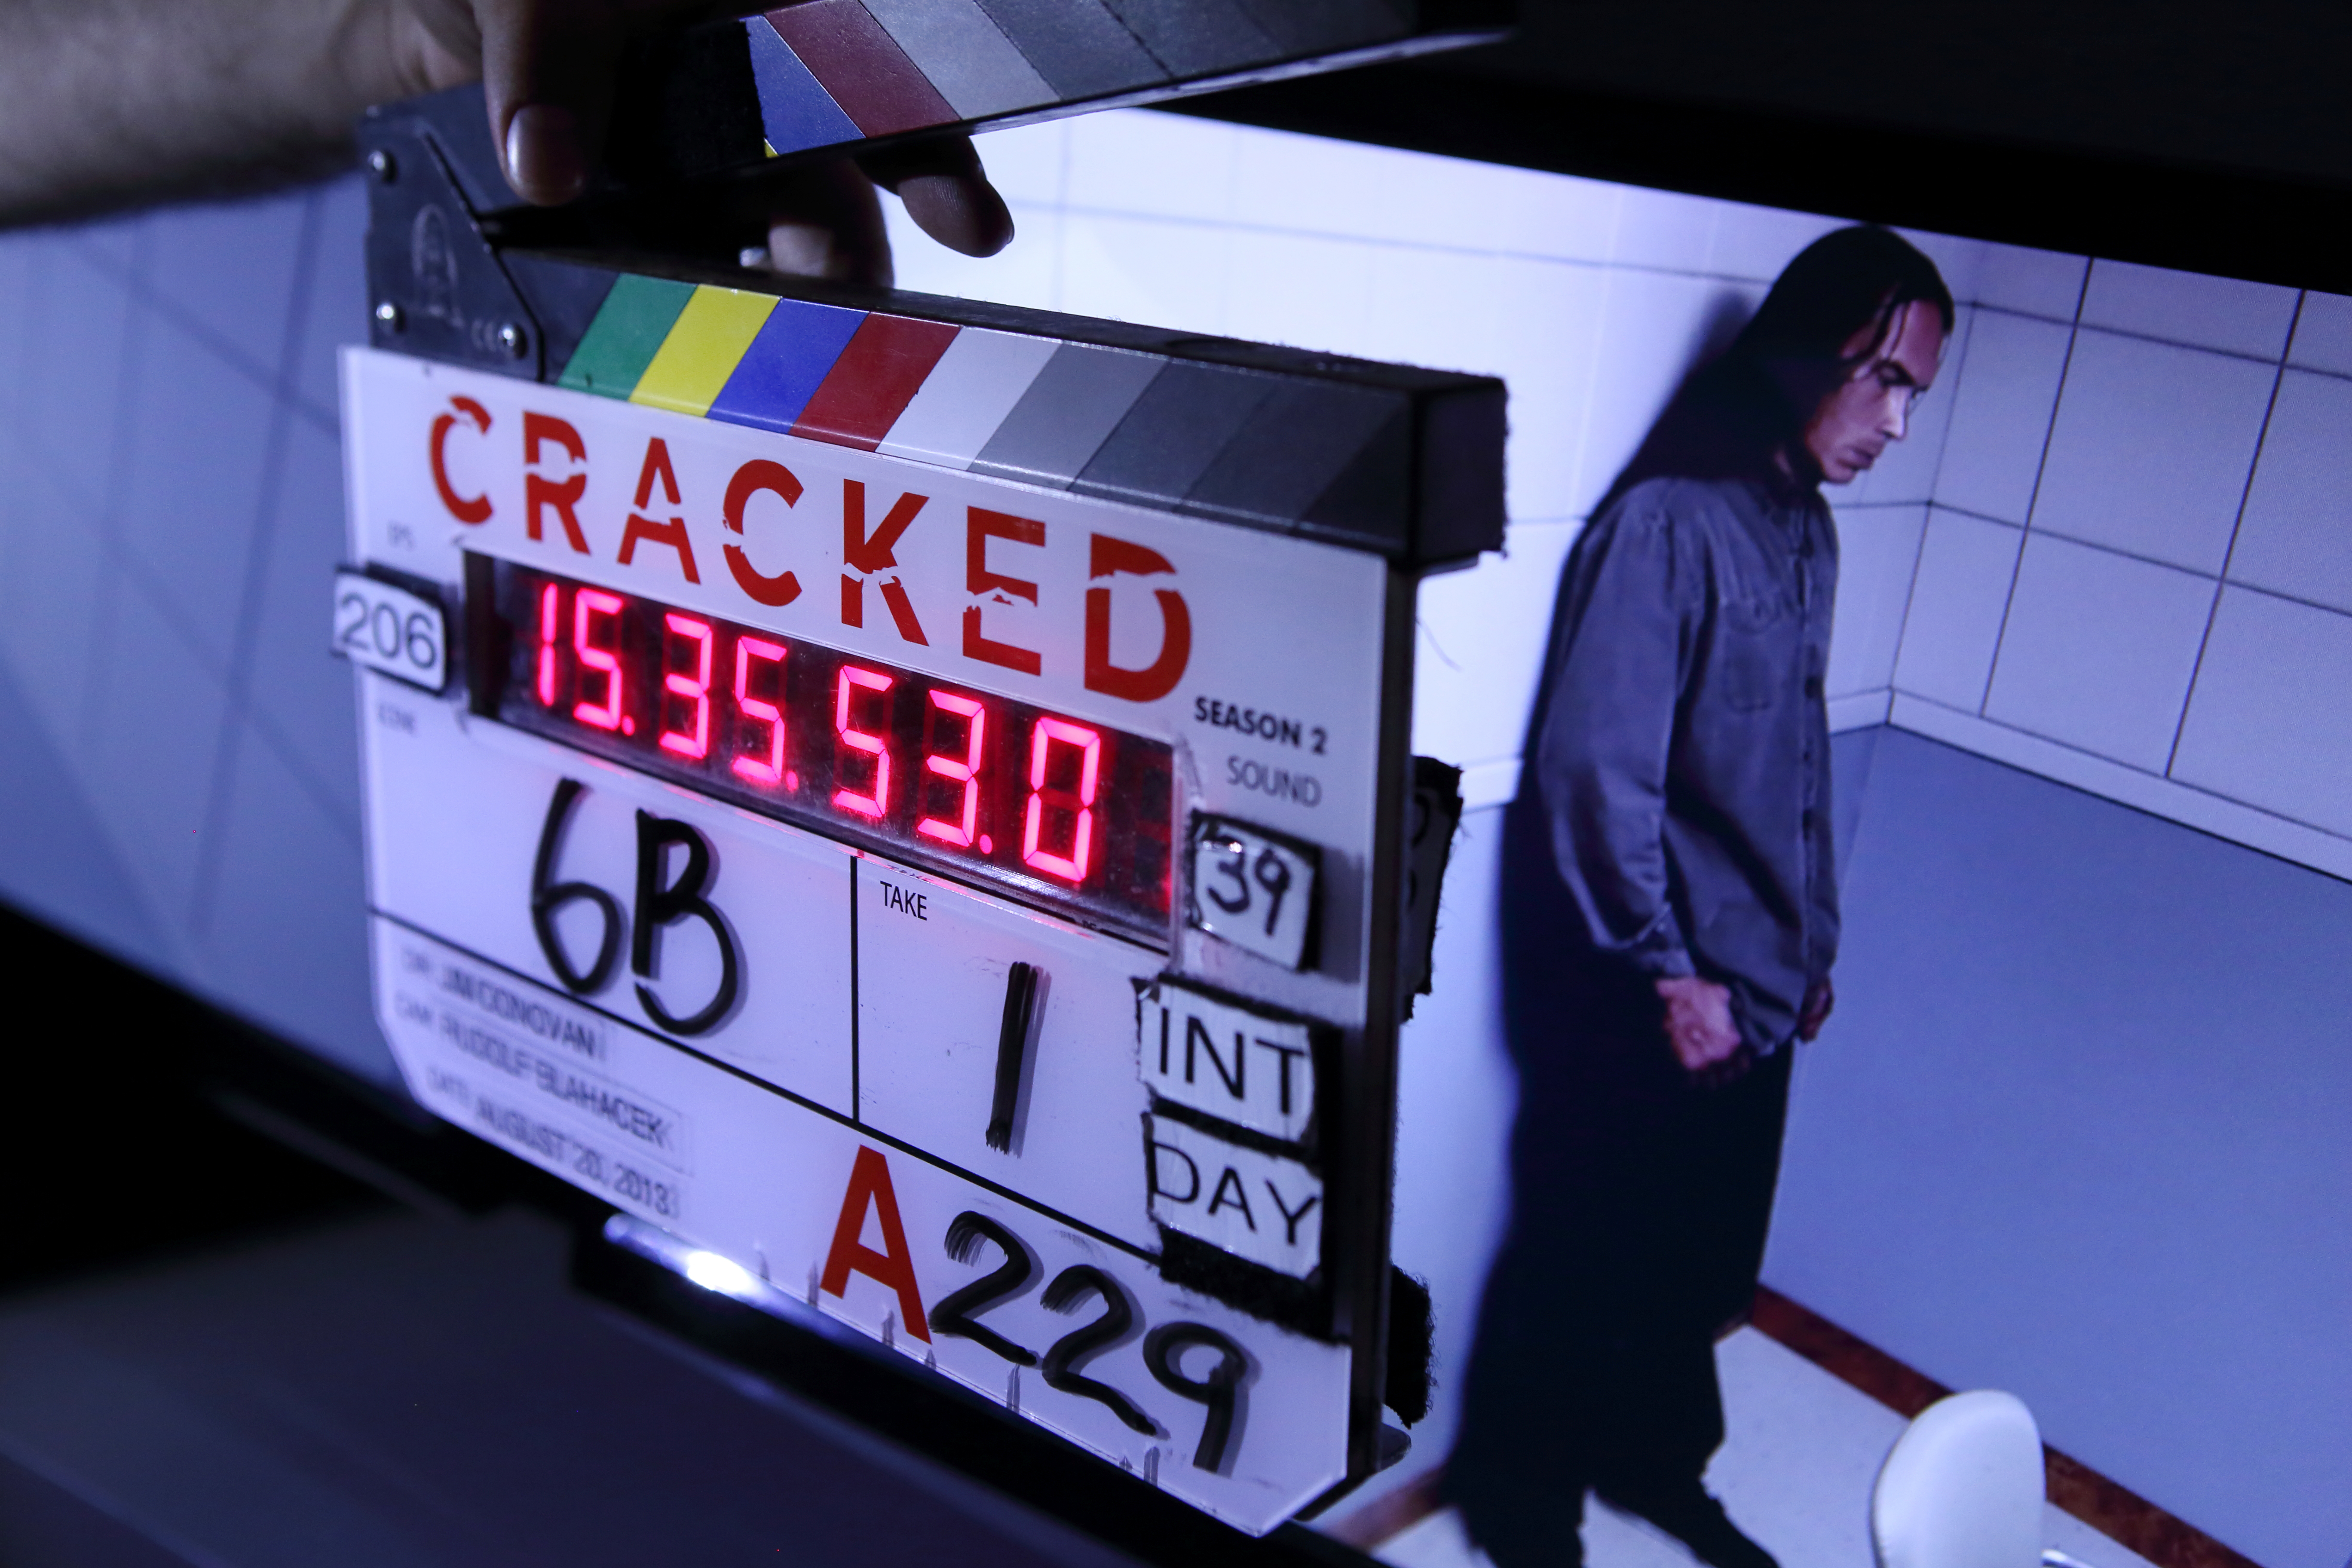 Slate from the set of Cracked, season 2, 